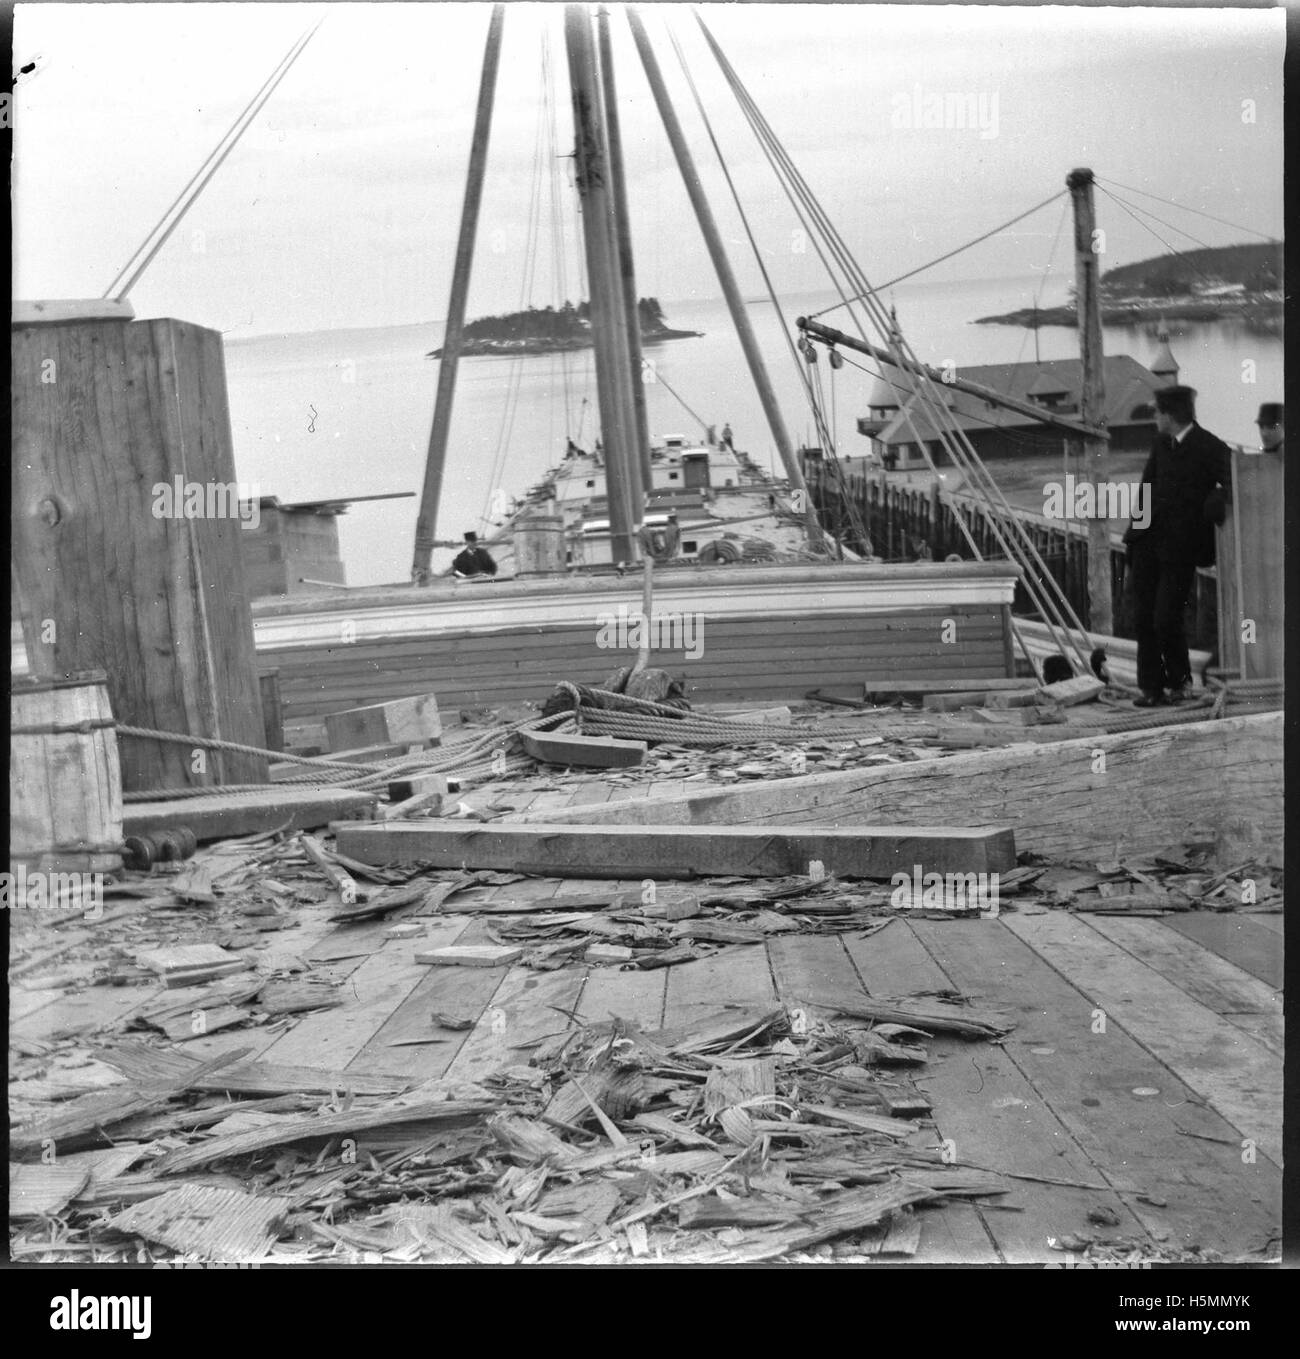 Construction of the 5-masted schooner John B. Prescott in 1898. The largest schooner in the world at that time, she was built to carry 4300 tons of coal. More than 10,000 people turned out for the launching at the Bean shipyard in Camden.  The vessel was 282 feet long, weighing 2249 tons with masts 168 feet tall.  The vessel was sheathed in iron to protect it from the ice. Stock Photo